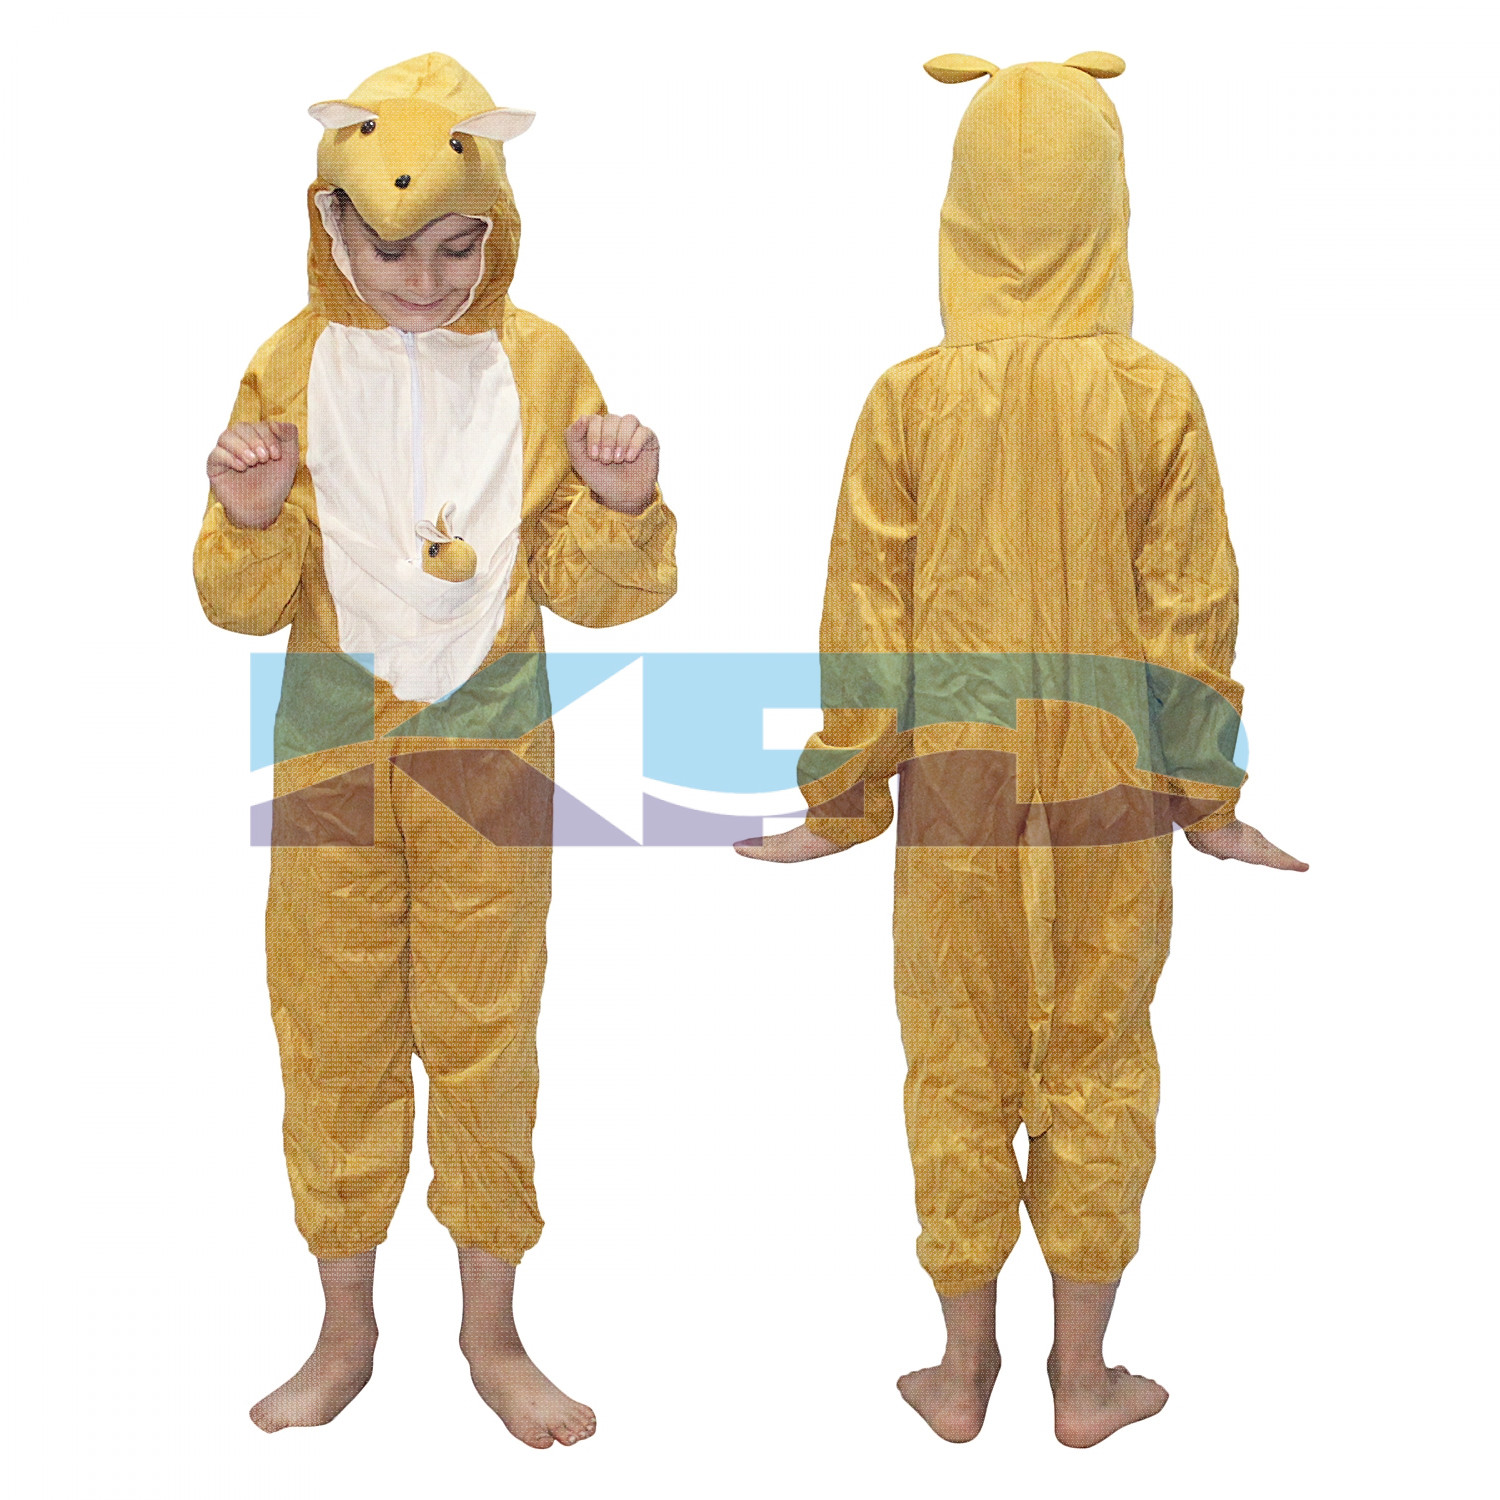 Kangaroo fancy dress for kids,International Wild Animal Costume for School Annual function/Theme Party/Competition/Stage Shows Dress